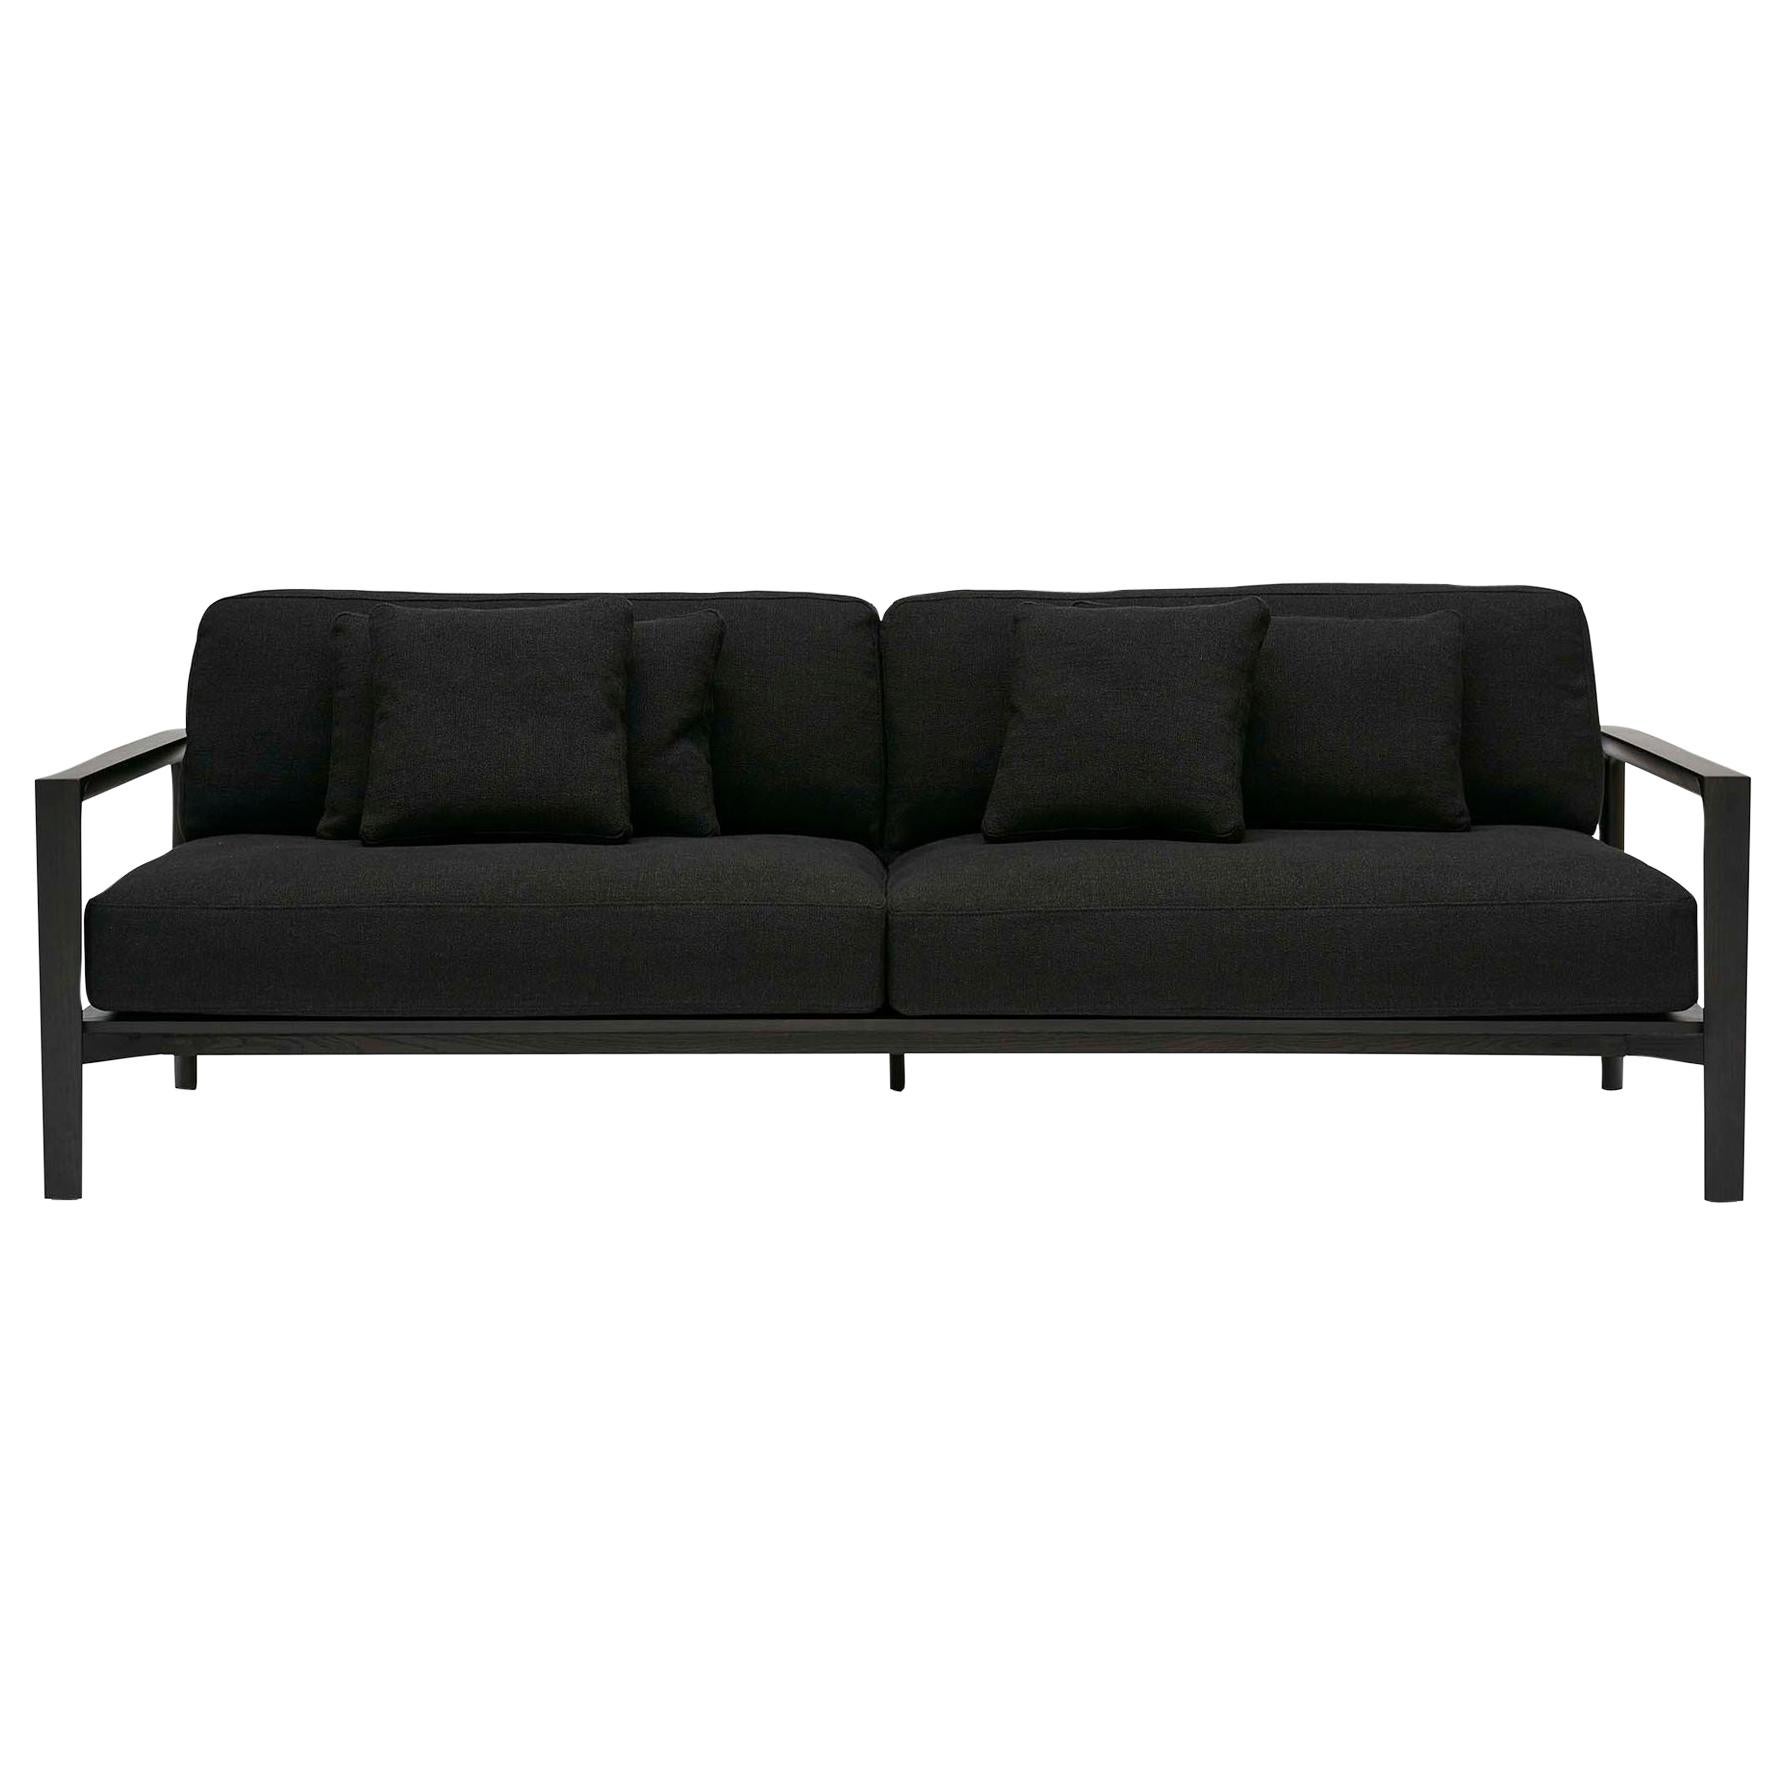 SP01 Ling Sofa -Timber Frame, Upholstered Black Lisbon Leather, Made in Italy For Sale